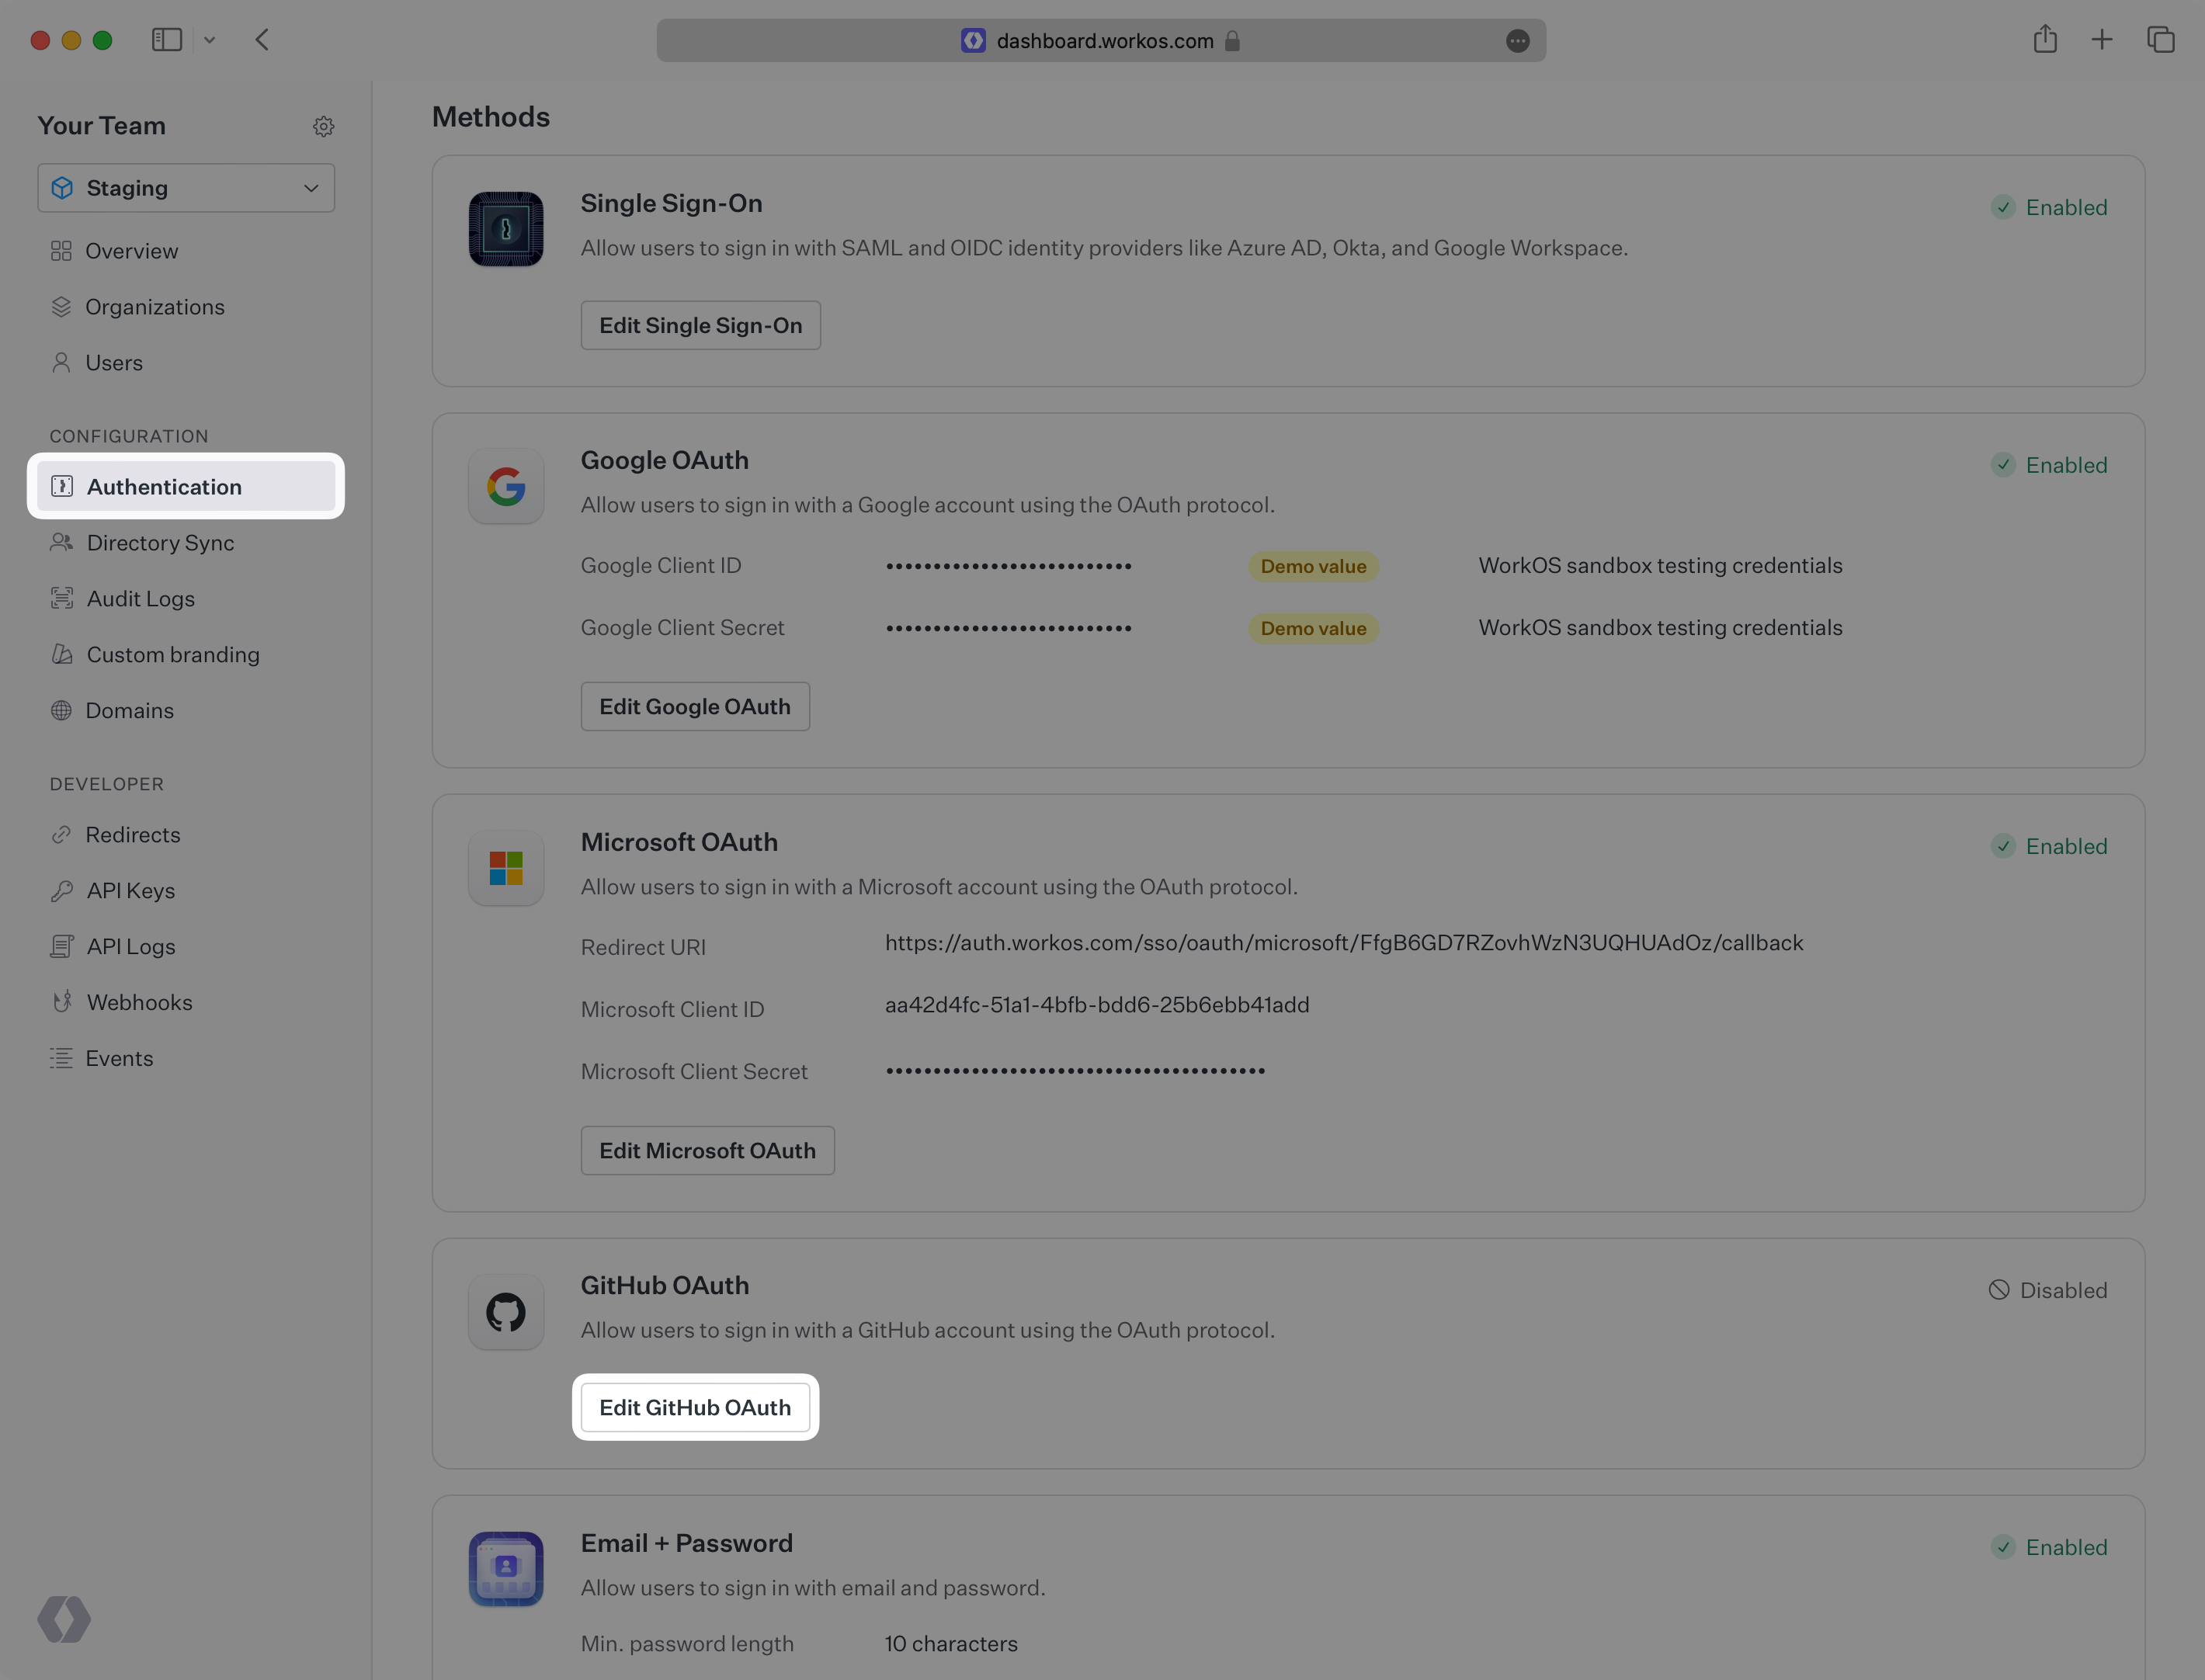 A screenshot showing the GitHub OAuth section in the WorkOS Dashboard.